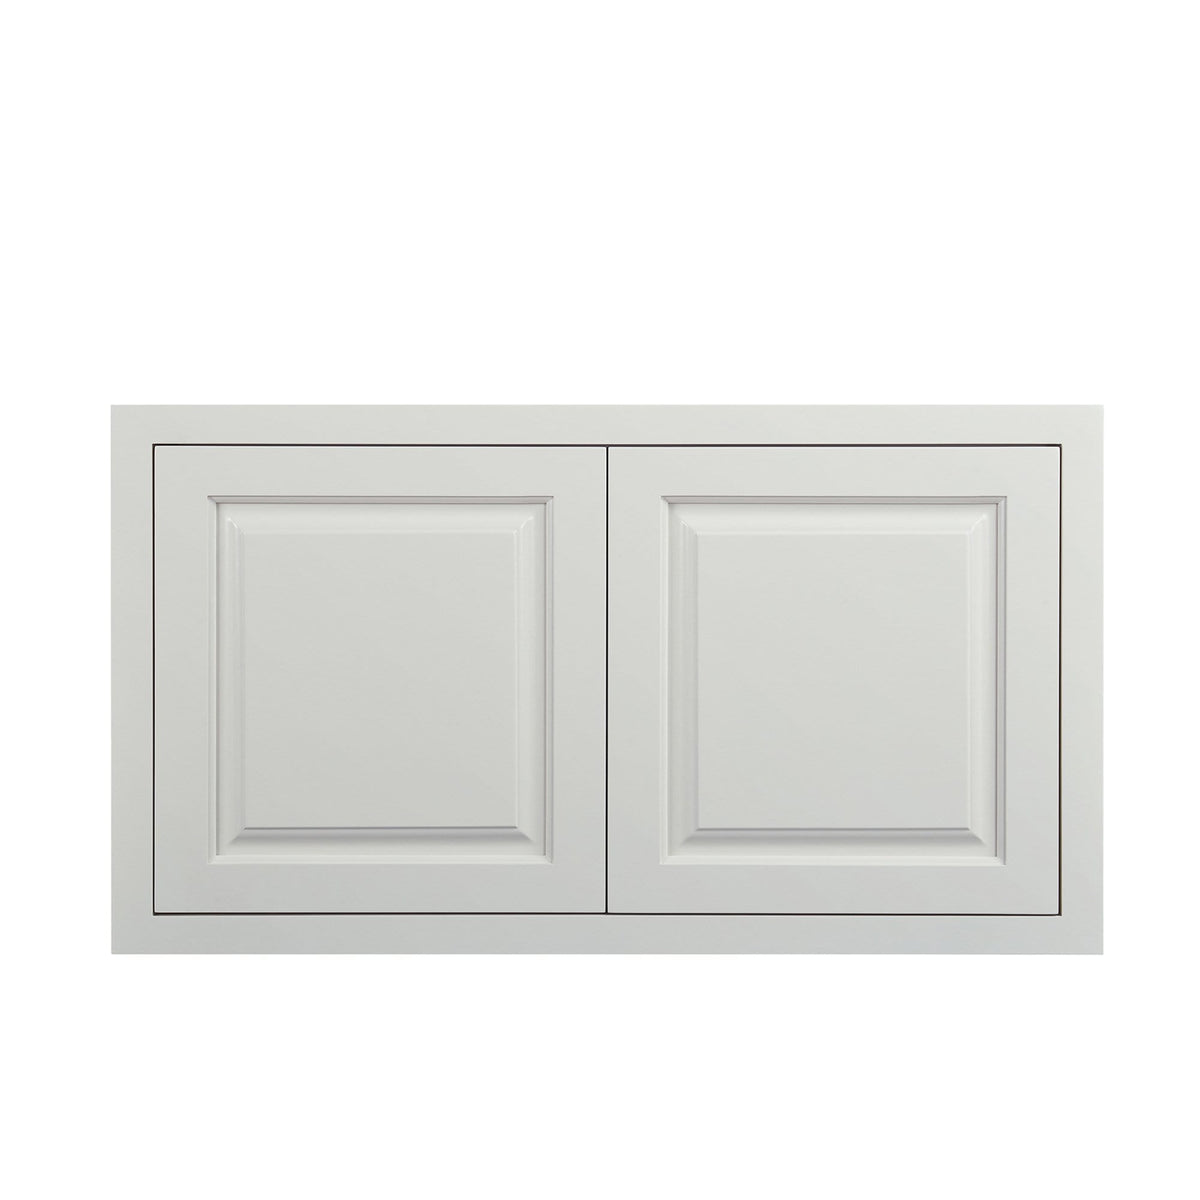 Wall Cabinet 36" Wide 24" Deep Vintage White Inset Raised Panel Refrigerator Wall Cabinet - Double Door D5W361824 Inset Kitchen Cabinets